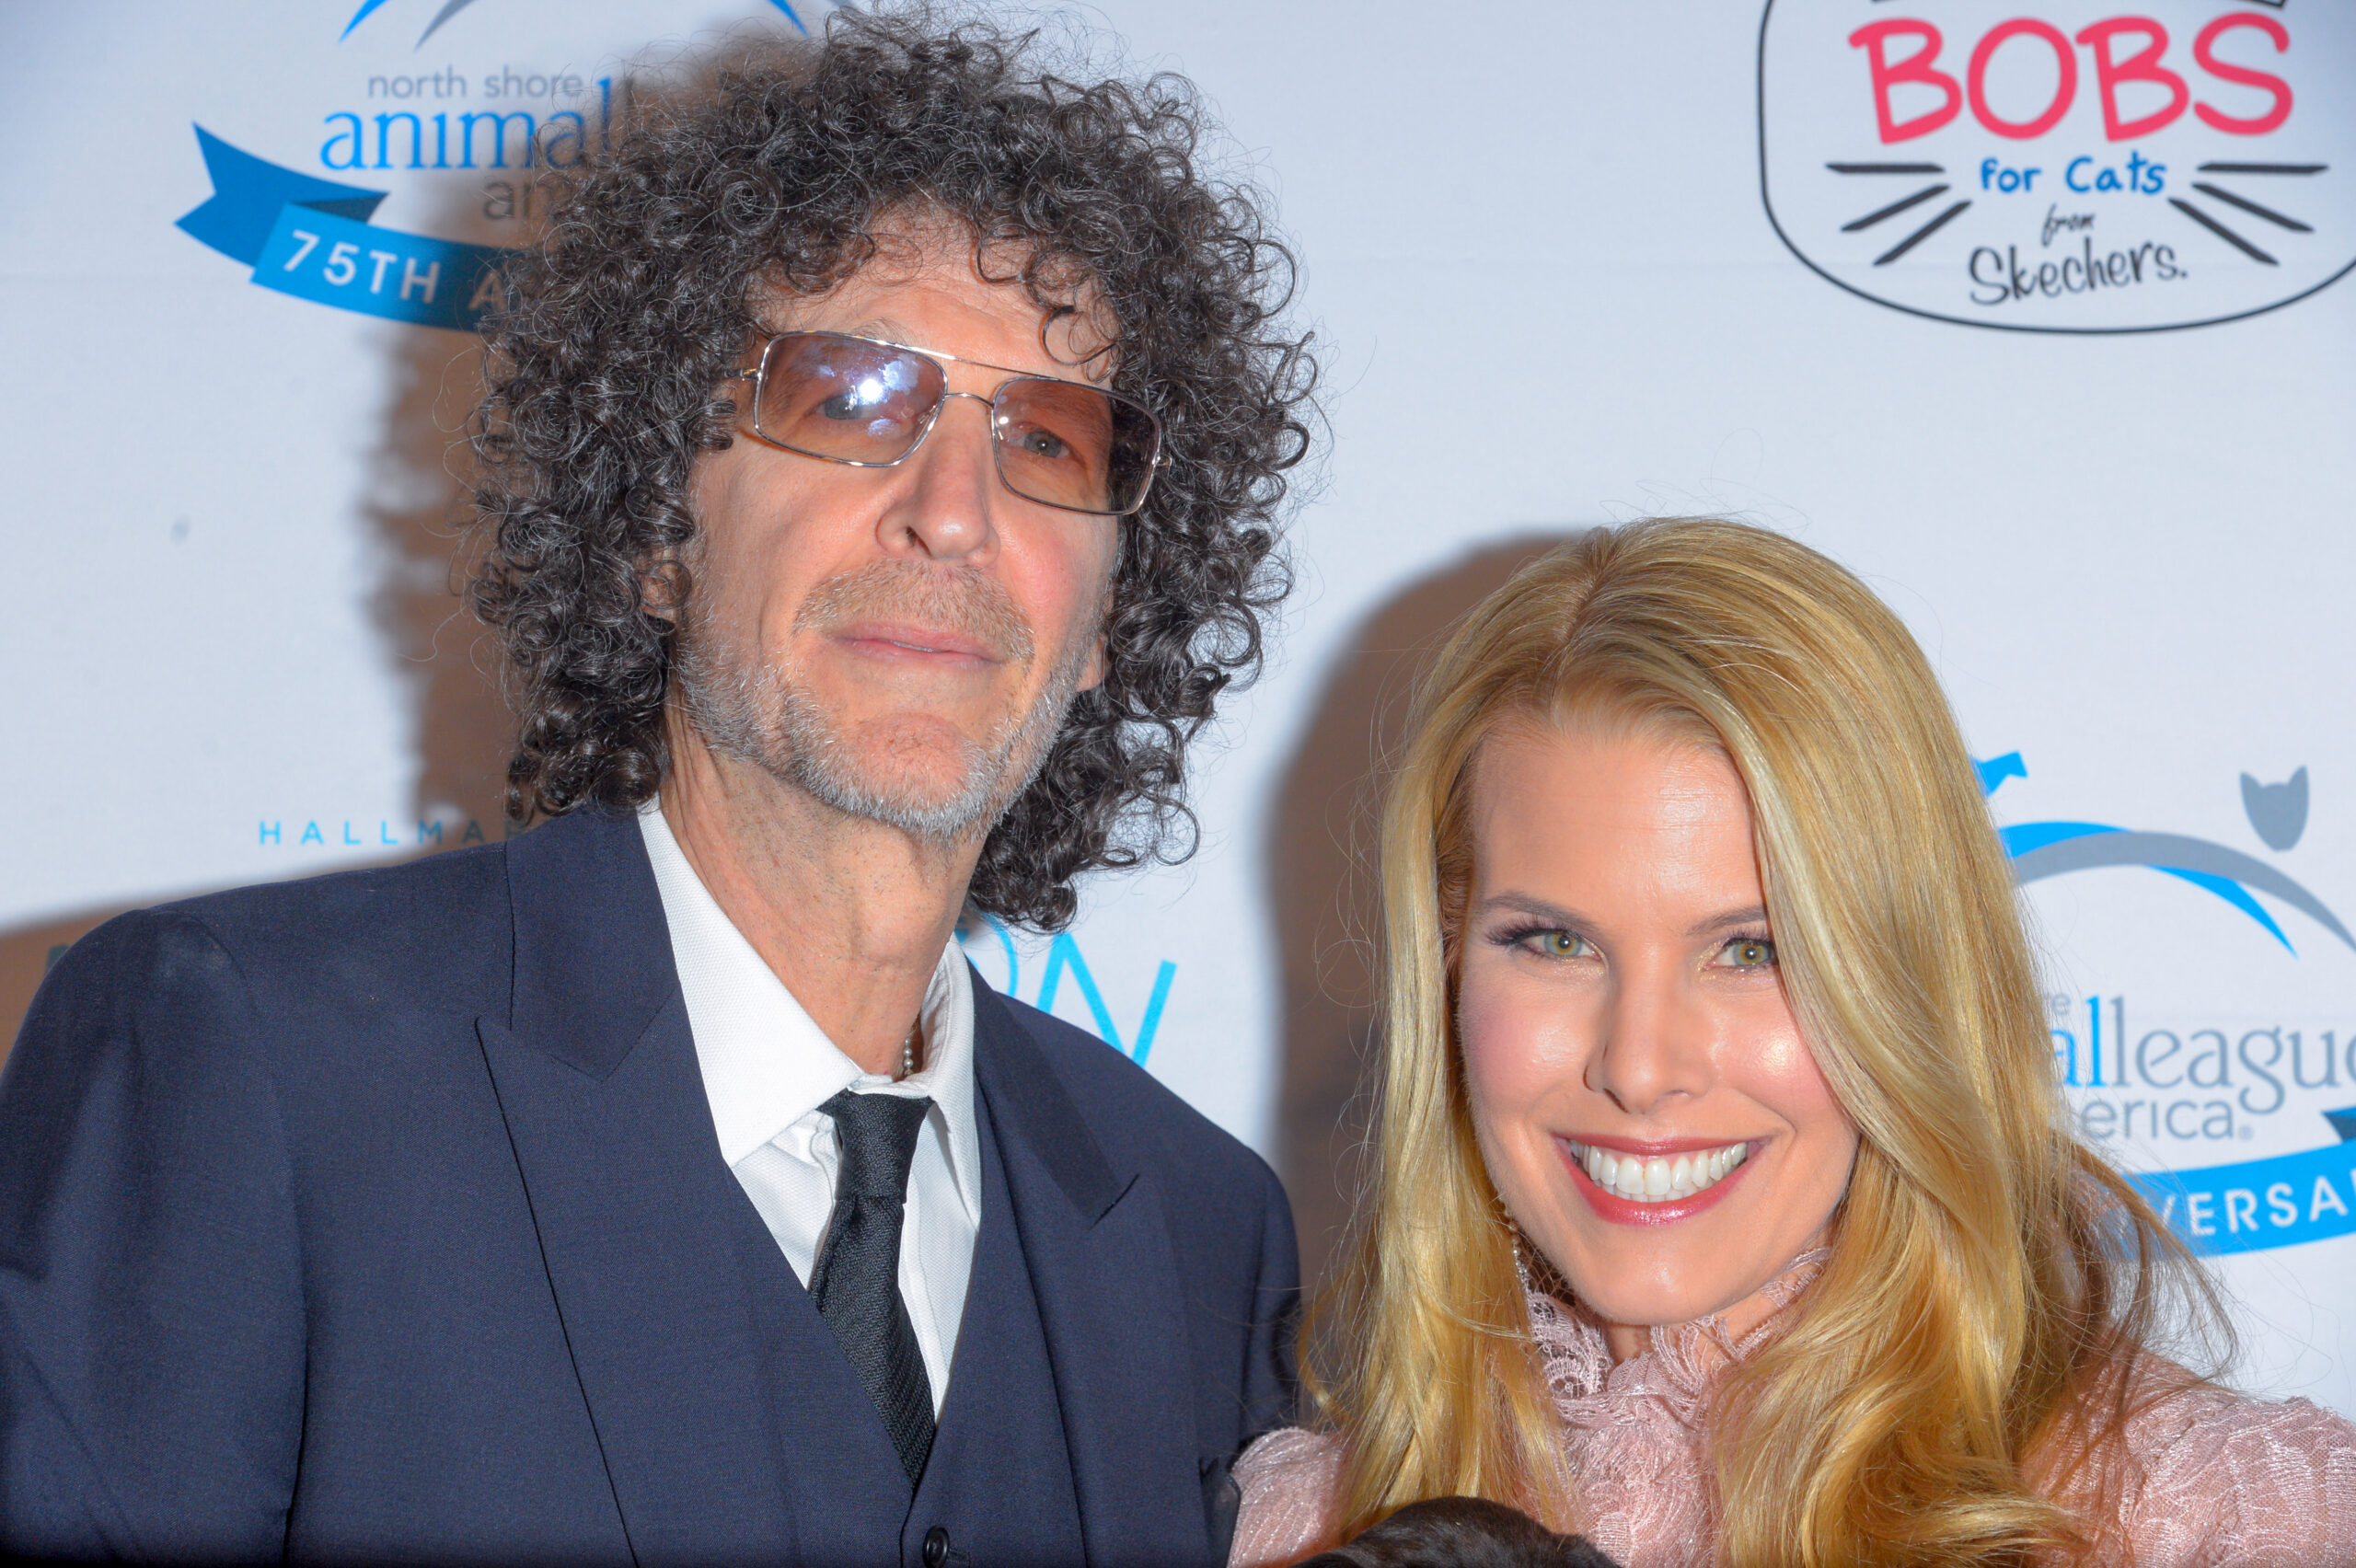 Howard Stern wears a black suit and tie and stands with Beth Stern